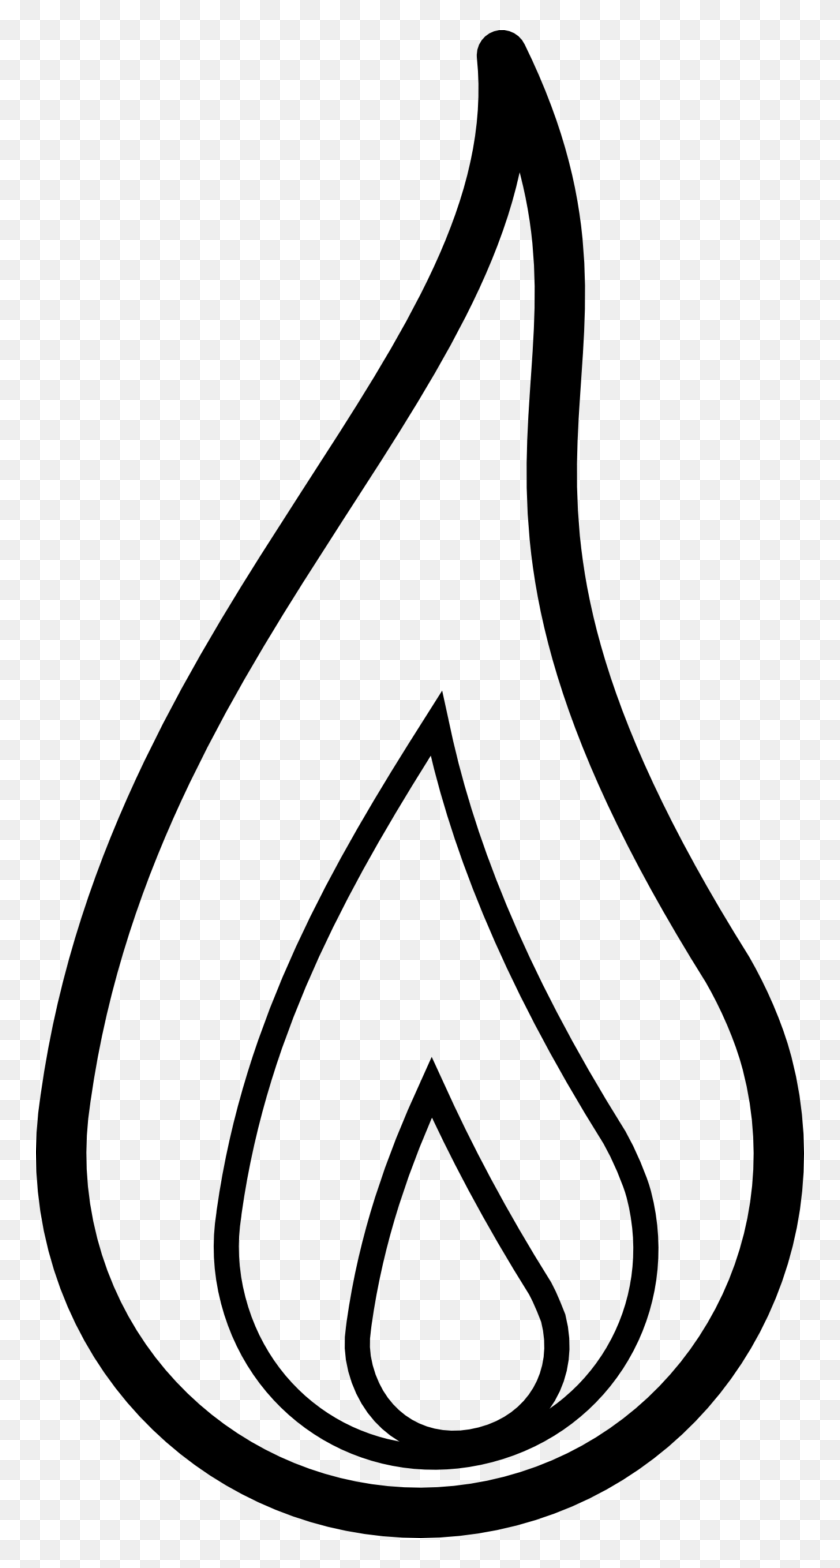 768x1508 Fire Flames Clipart Black And White Free - Fire Border Clipart